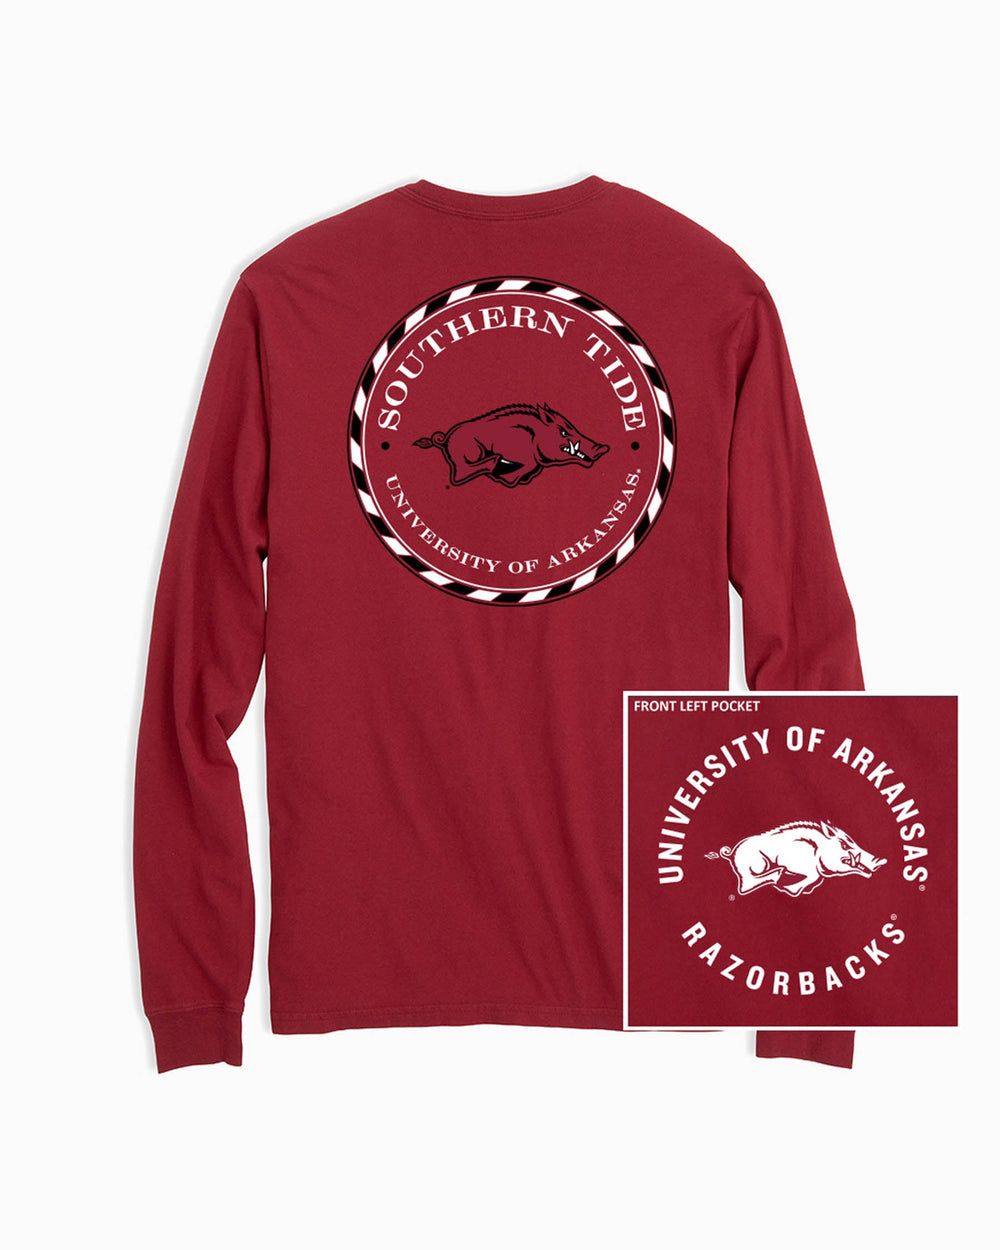 The front and back of the Arkansas Razorbacks Long Sleeve Medallion Logo T-Shirt by Southern Tide - Crimson